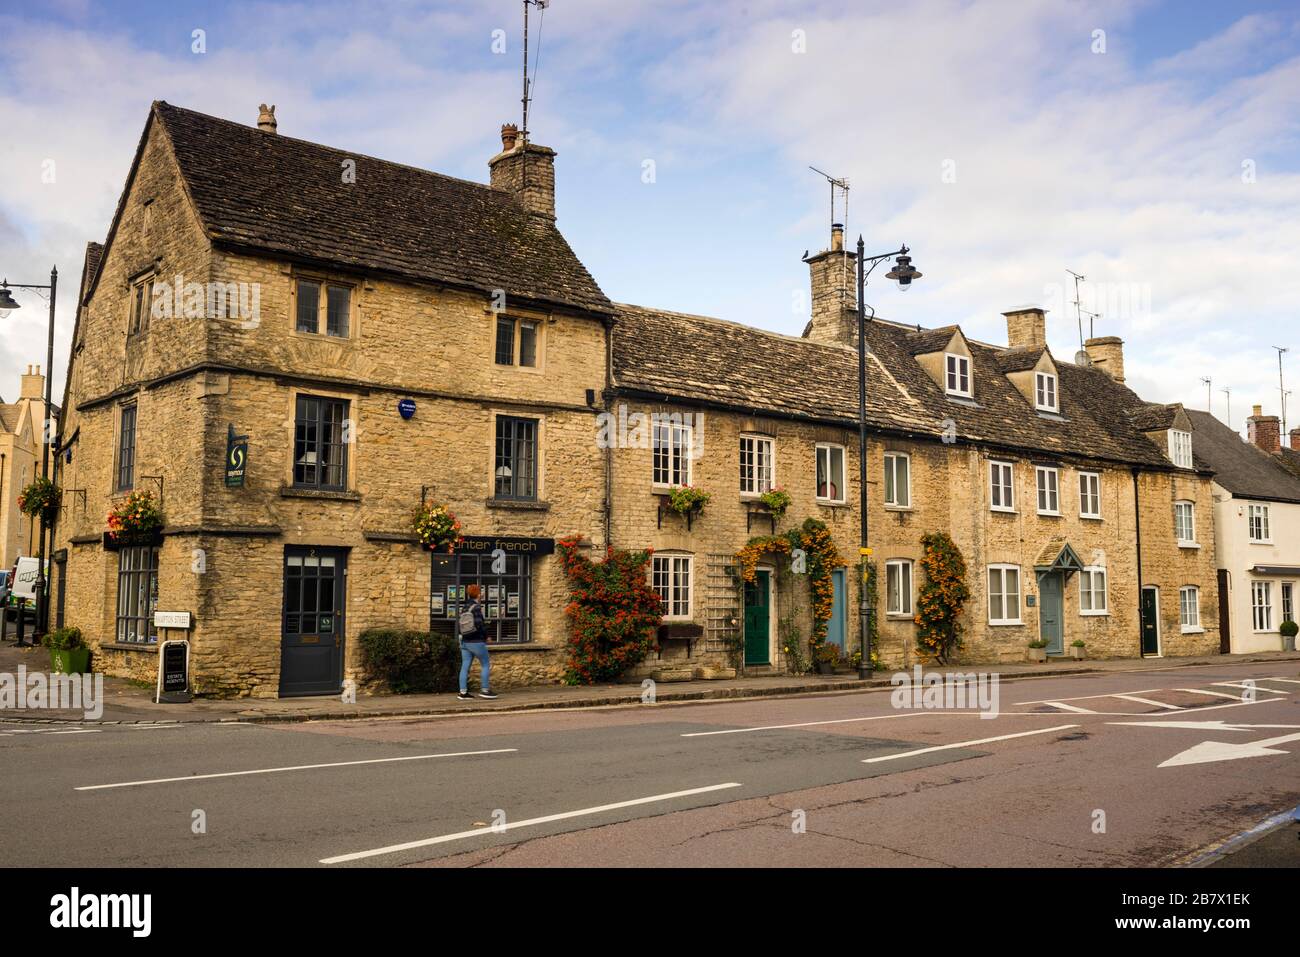 England town of Tetbury, a wool market town in the Cotswolds. Stock Photo